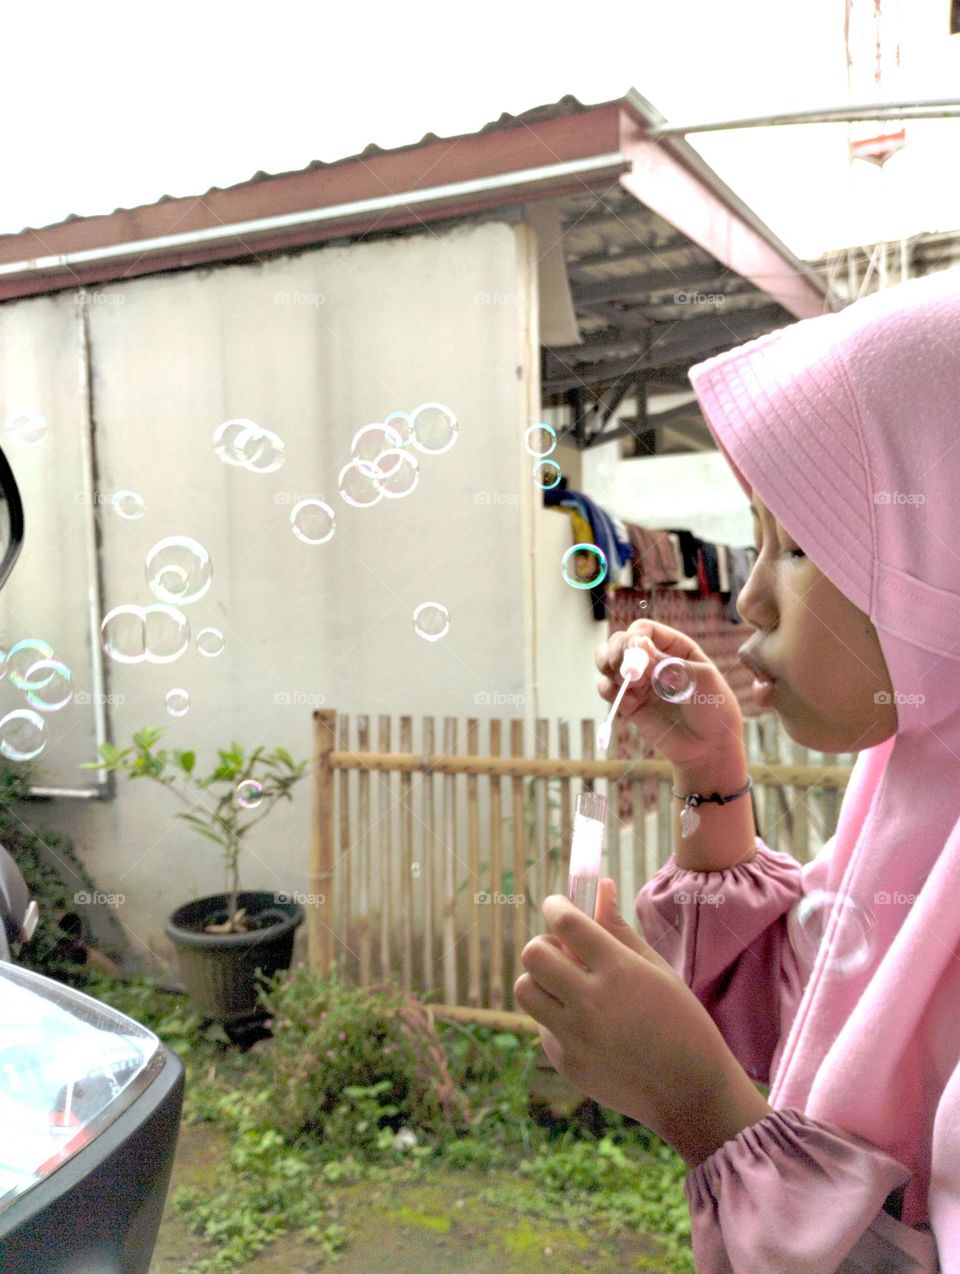 the little one is playing with bubbles